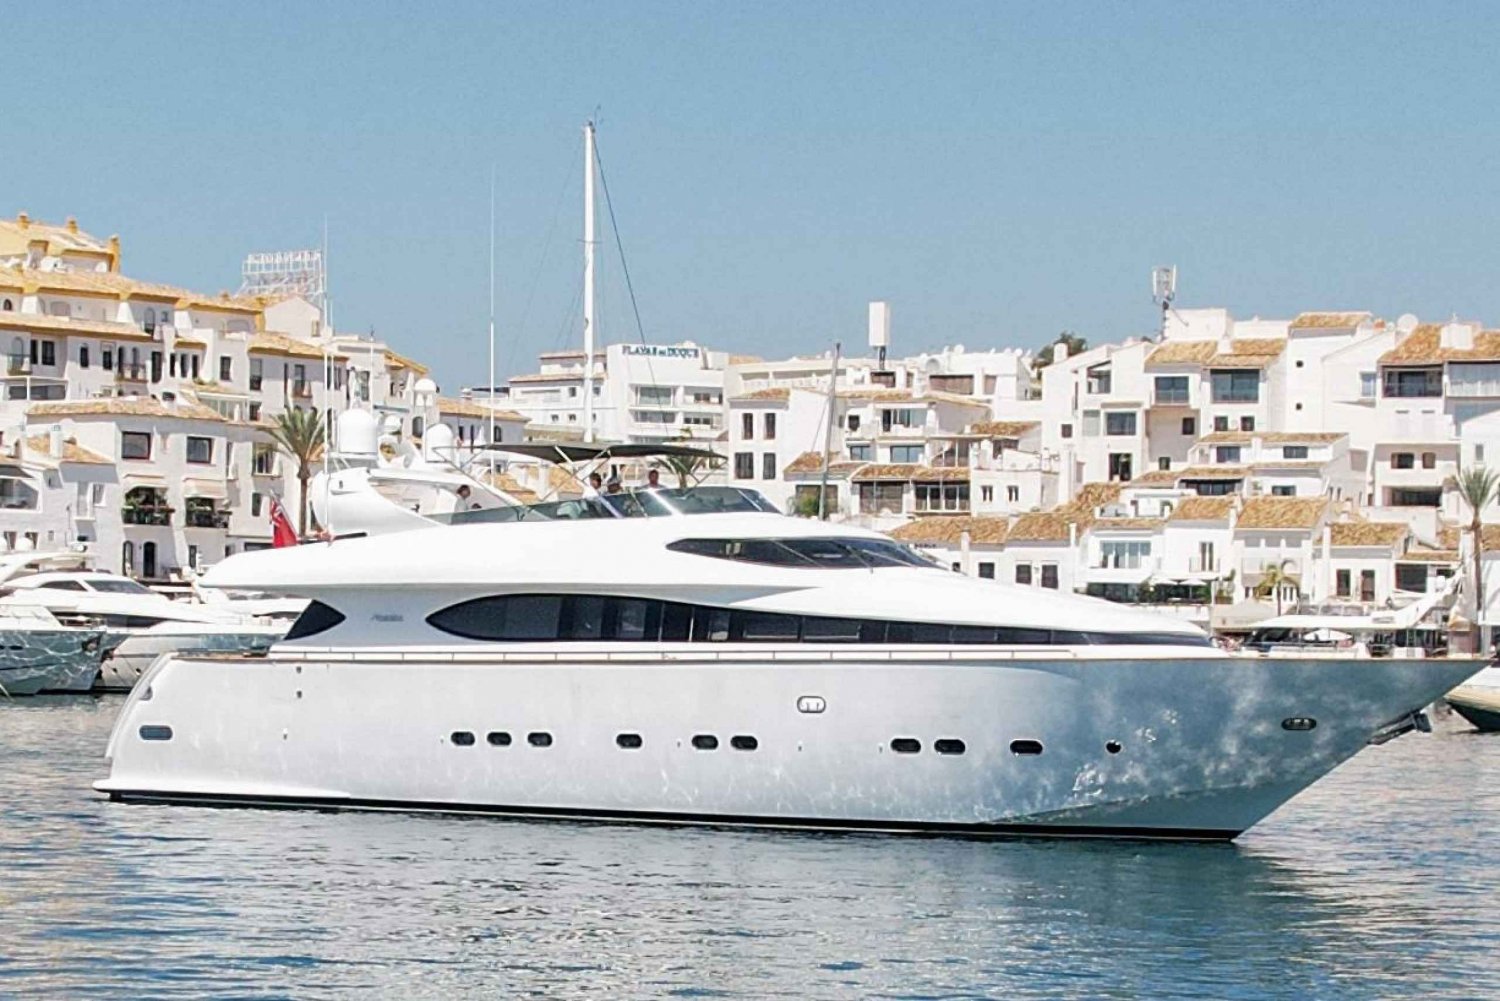 SuperYacht 4 Hour Charter:12 passengers:drinks and food inc.